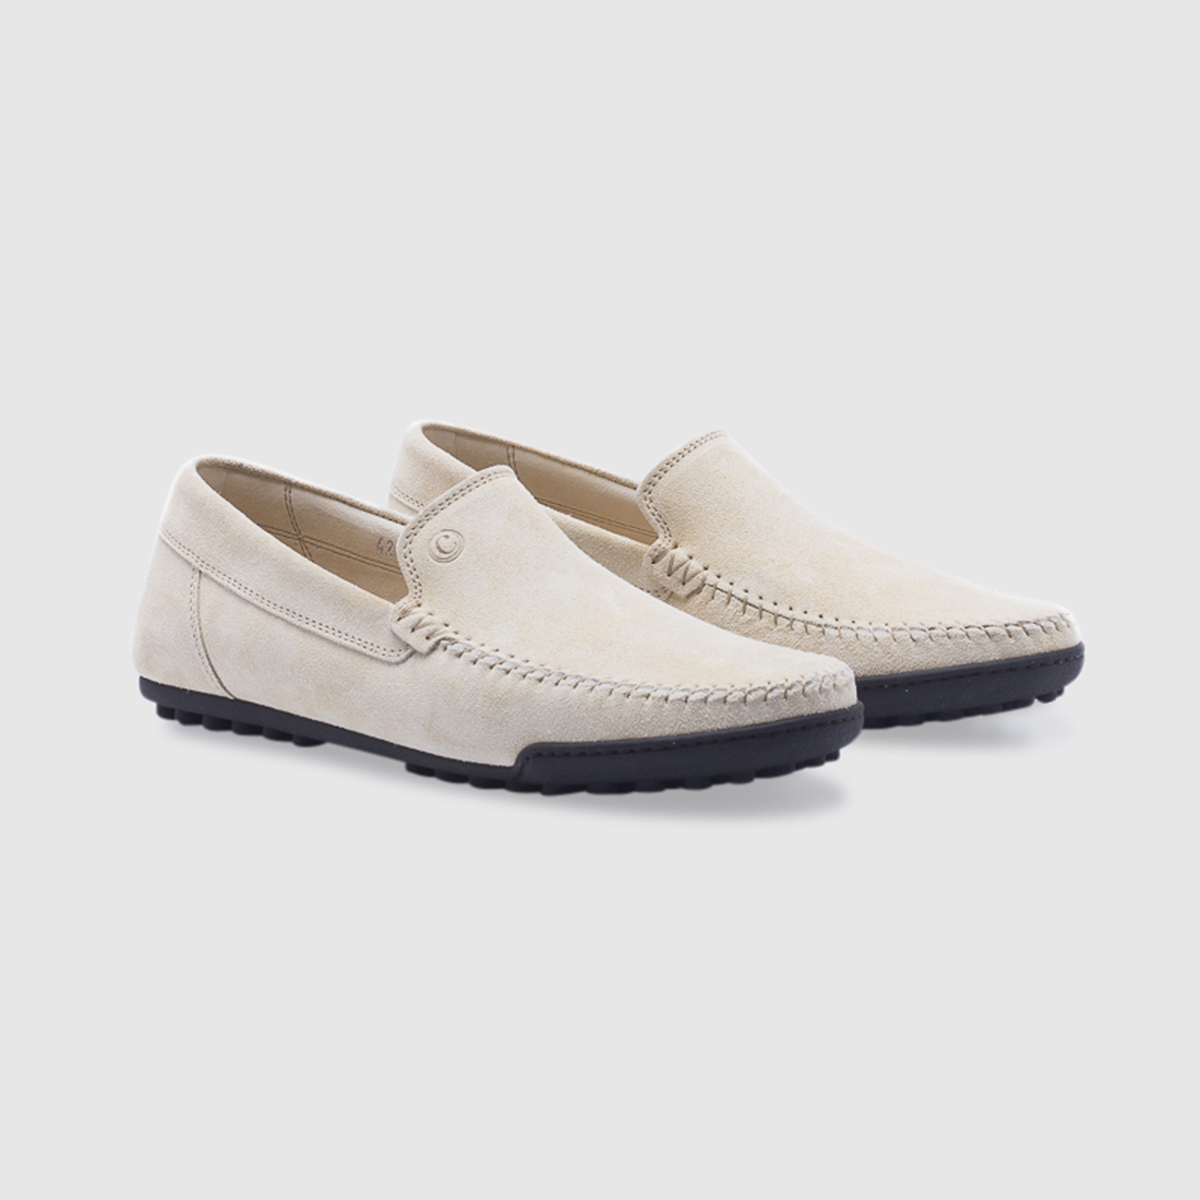 Unlined driving shoe in suede – cream Calò on sale 2022 2